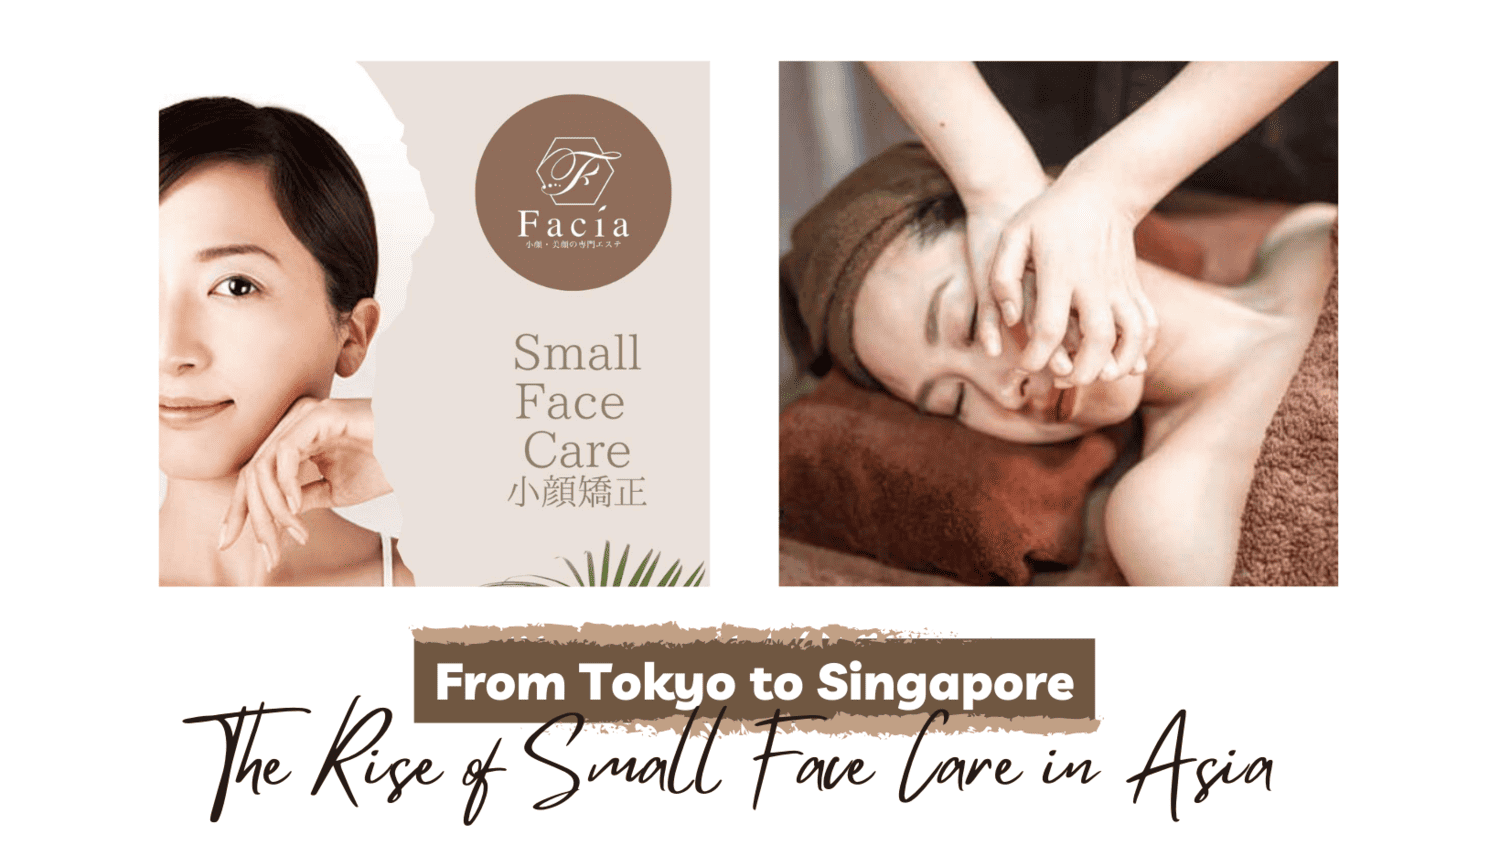 From Tokyo to Singapore: The Rise of Small Face Care in Asia